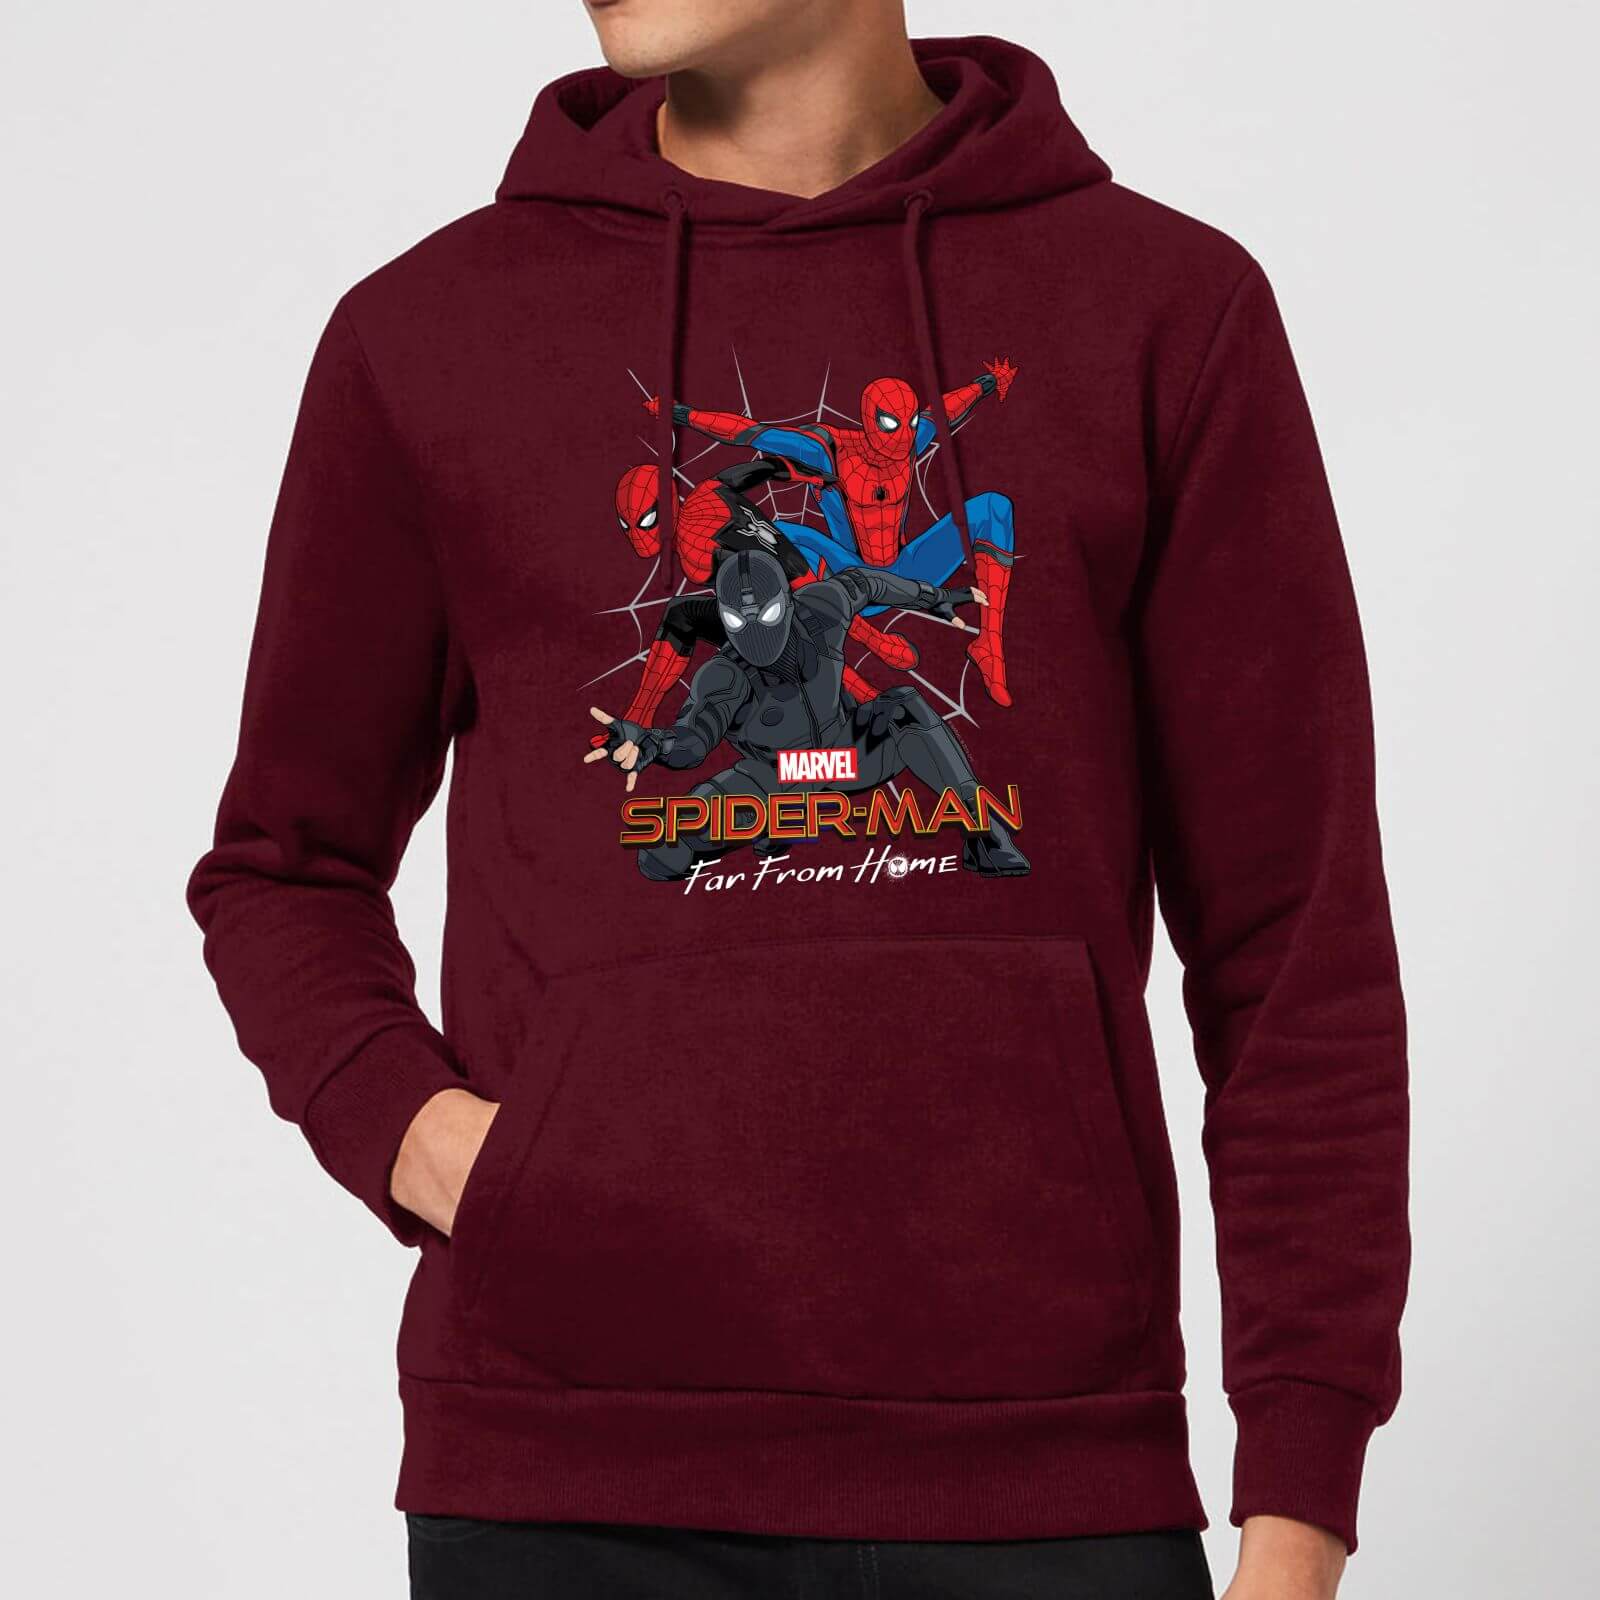 Spider-Man Far From Home Multi Costume Hoodie - Burgundy - XL